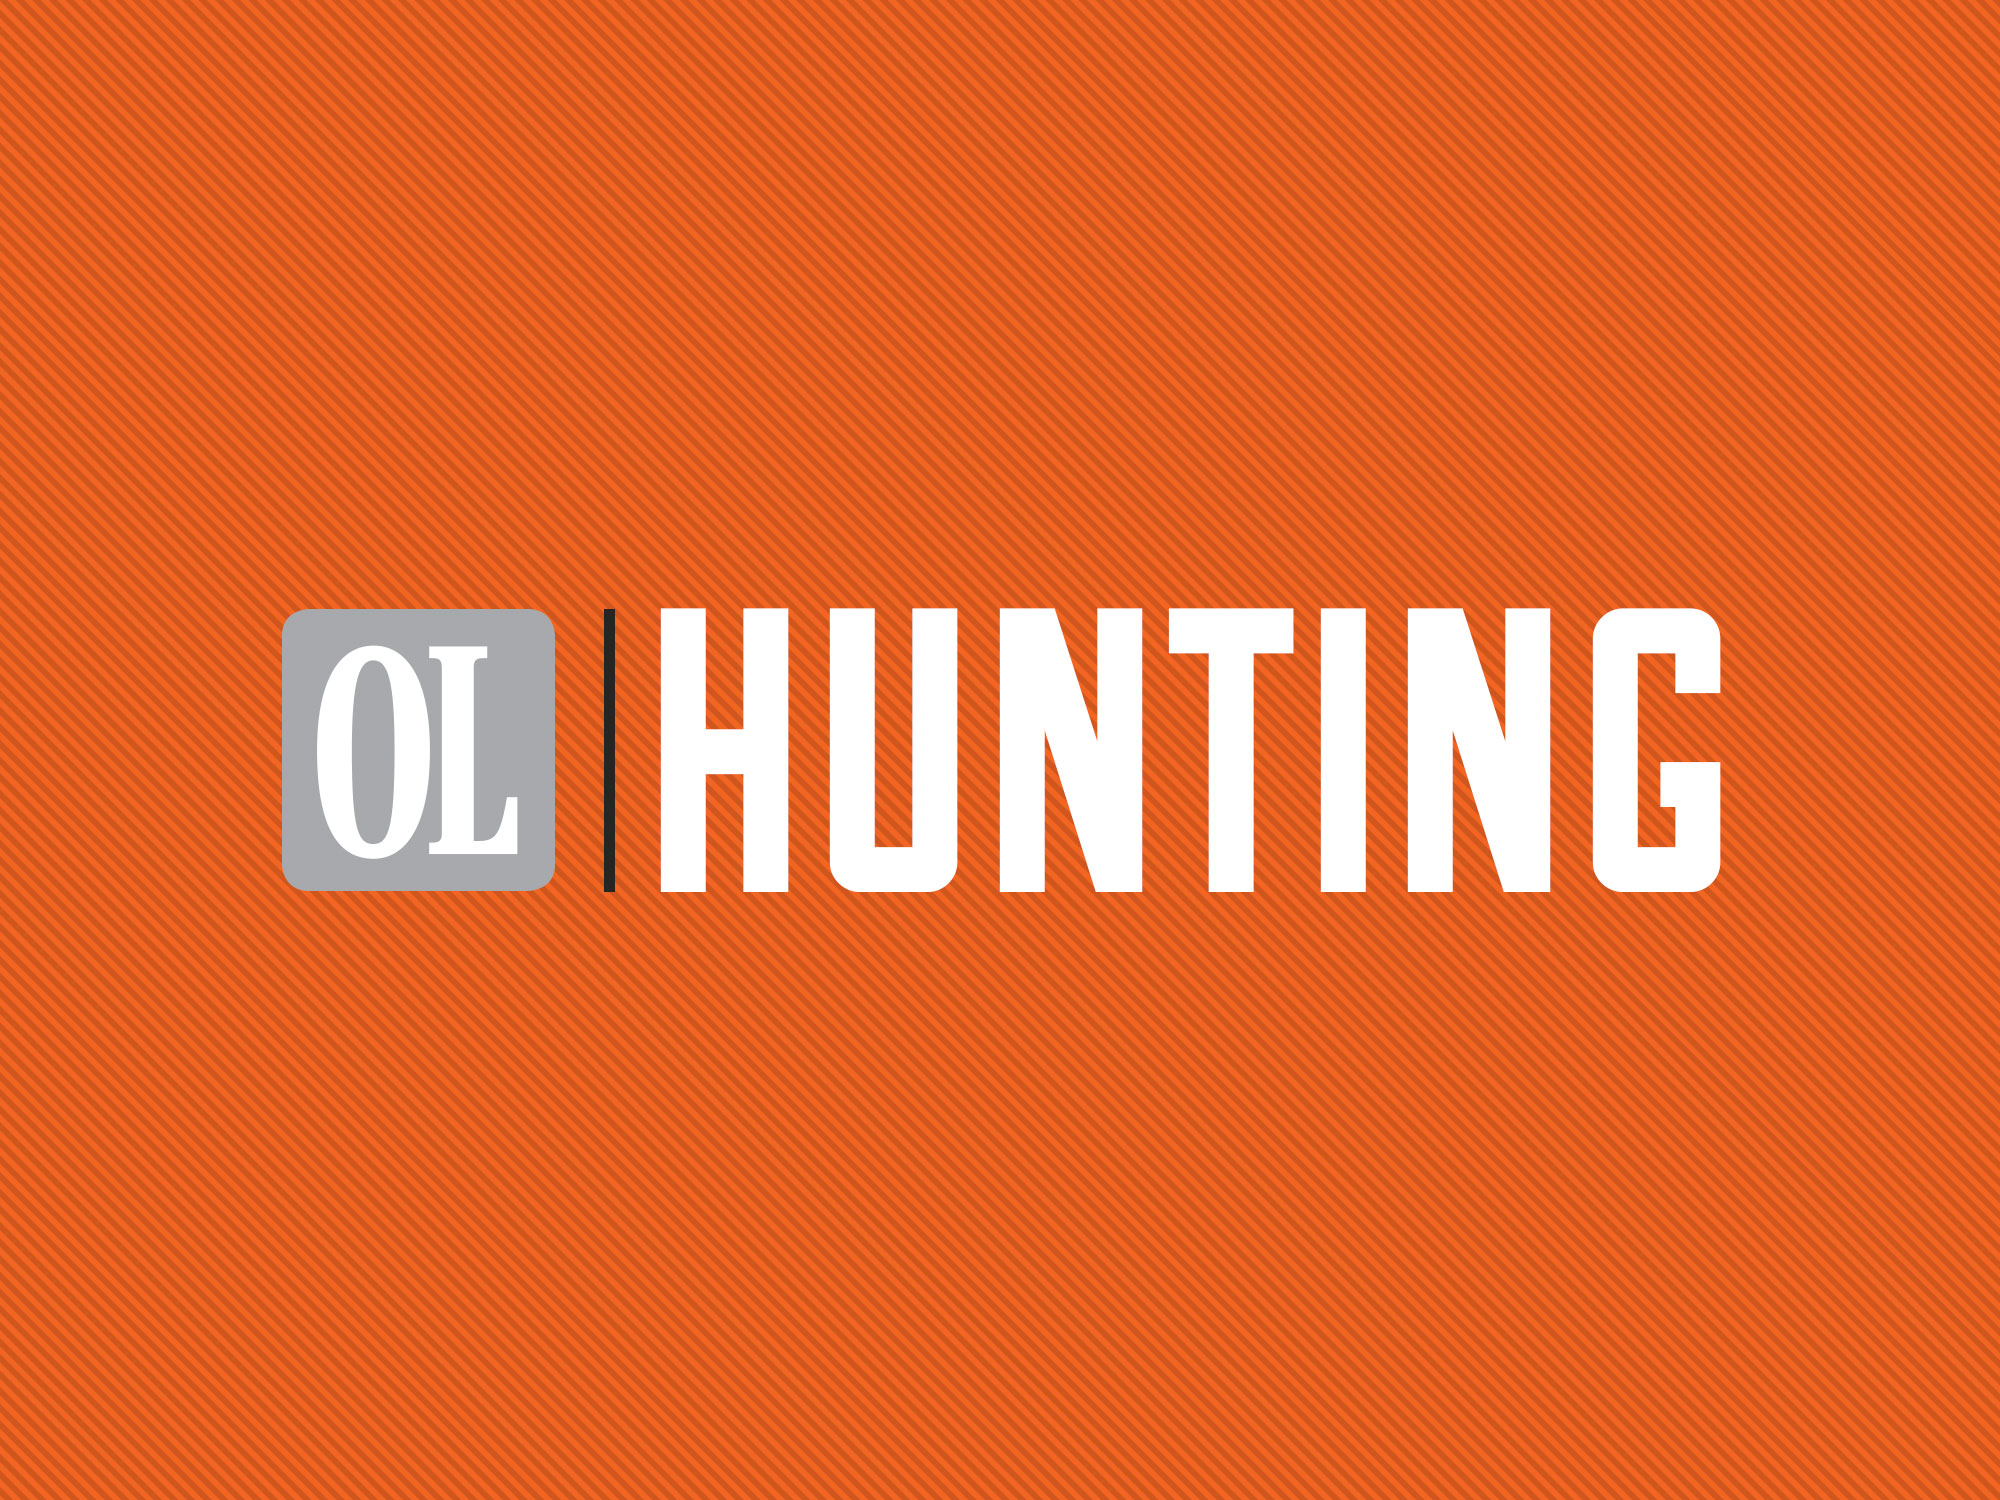 Live Hunt AK: The .375 Ruger Clay Pigeon Shoot